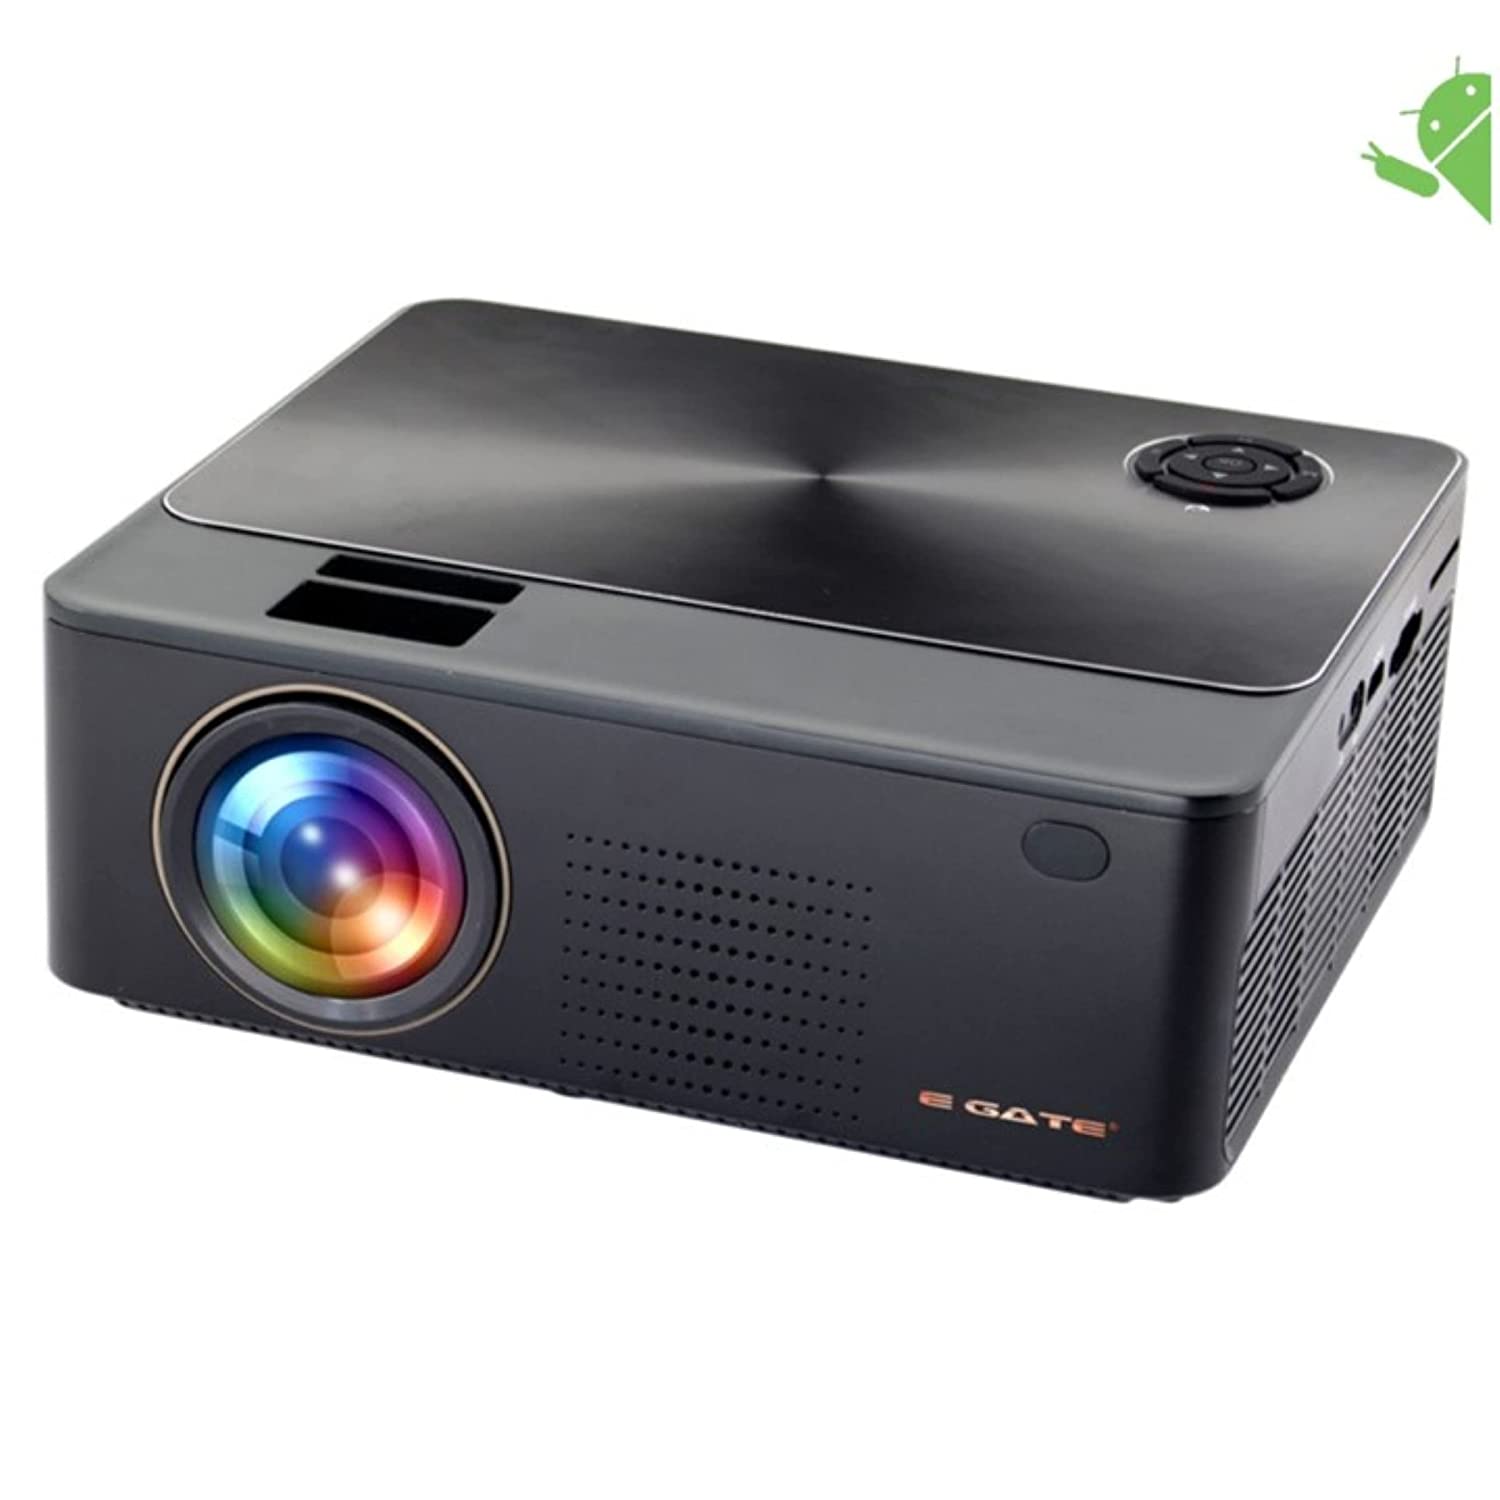 Egate K9 Android LED Projector